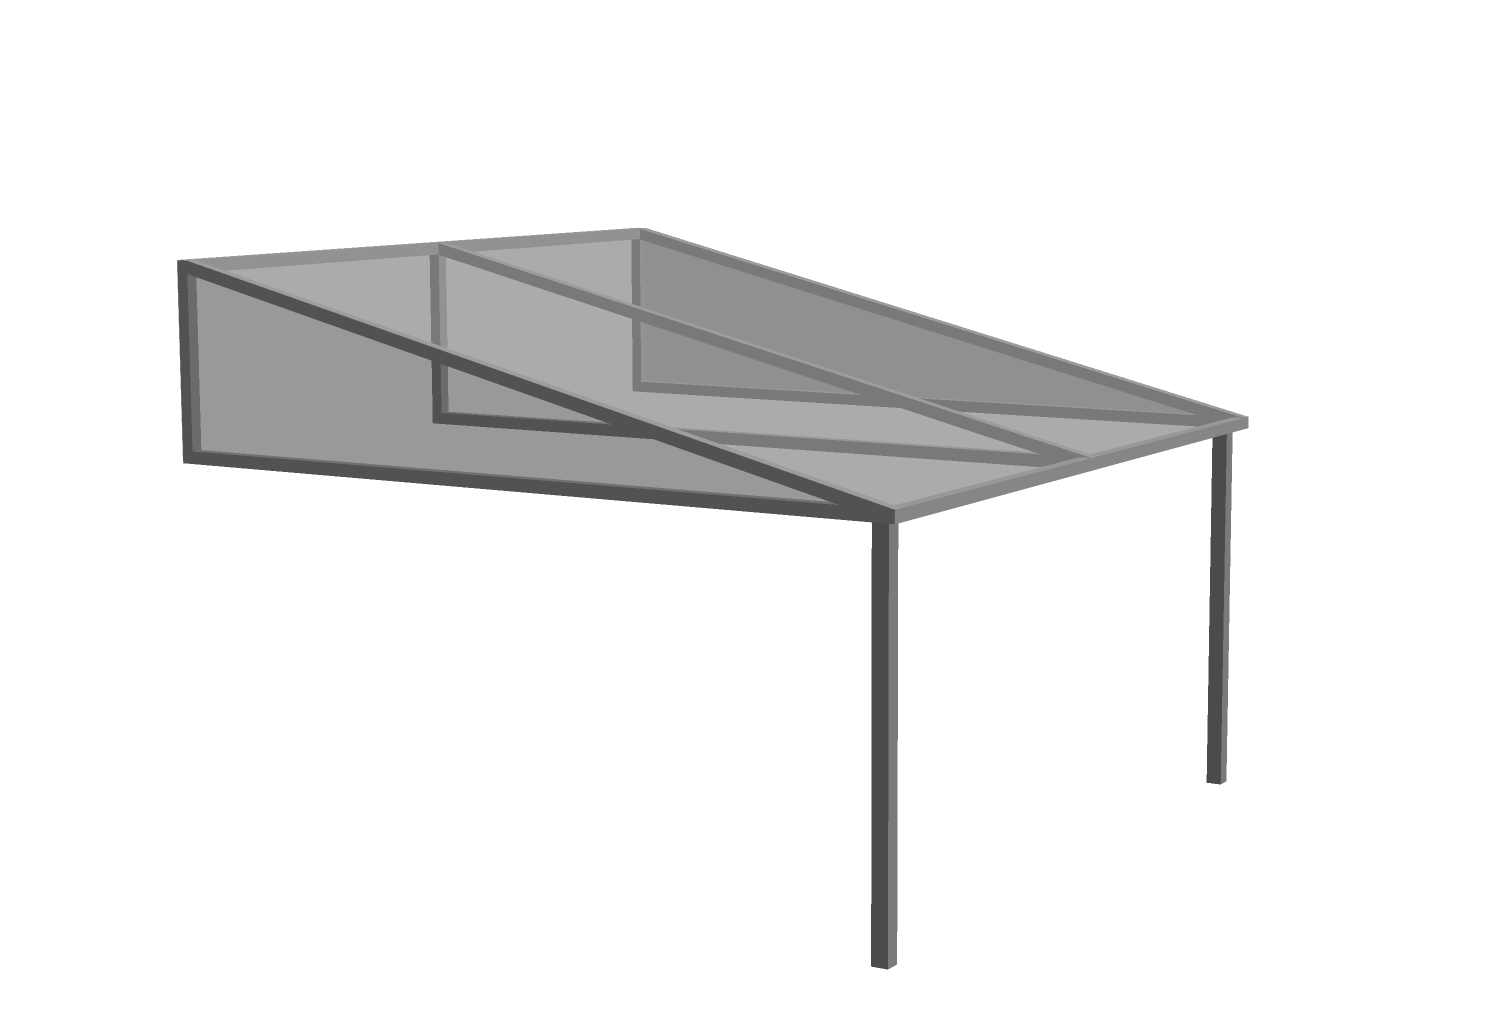 3D model of a patio canopy awning